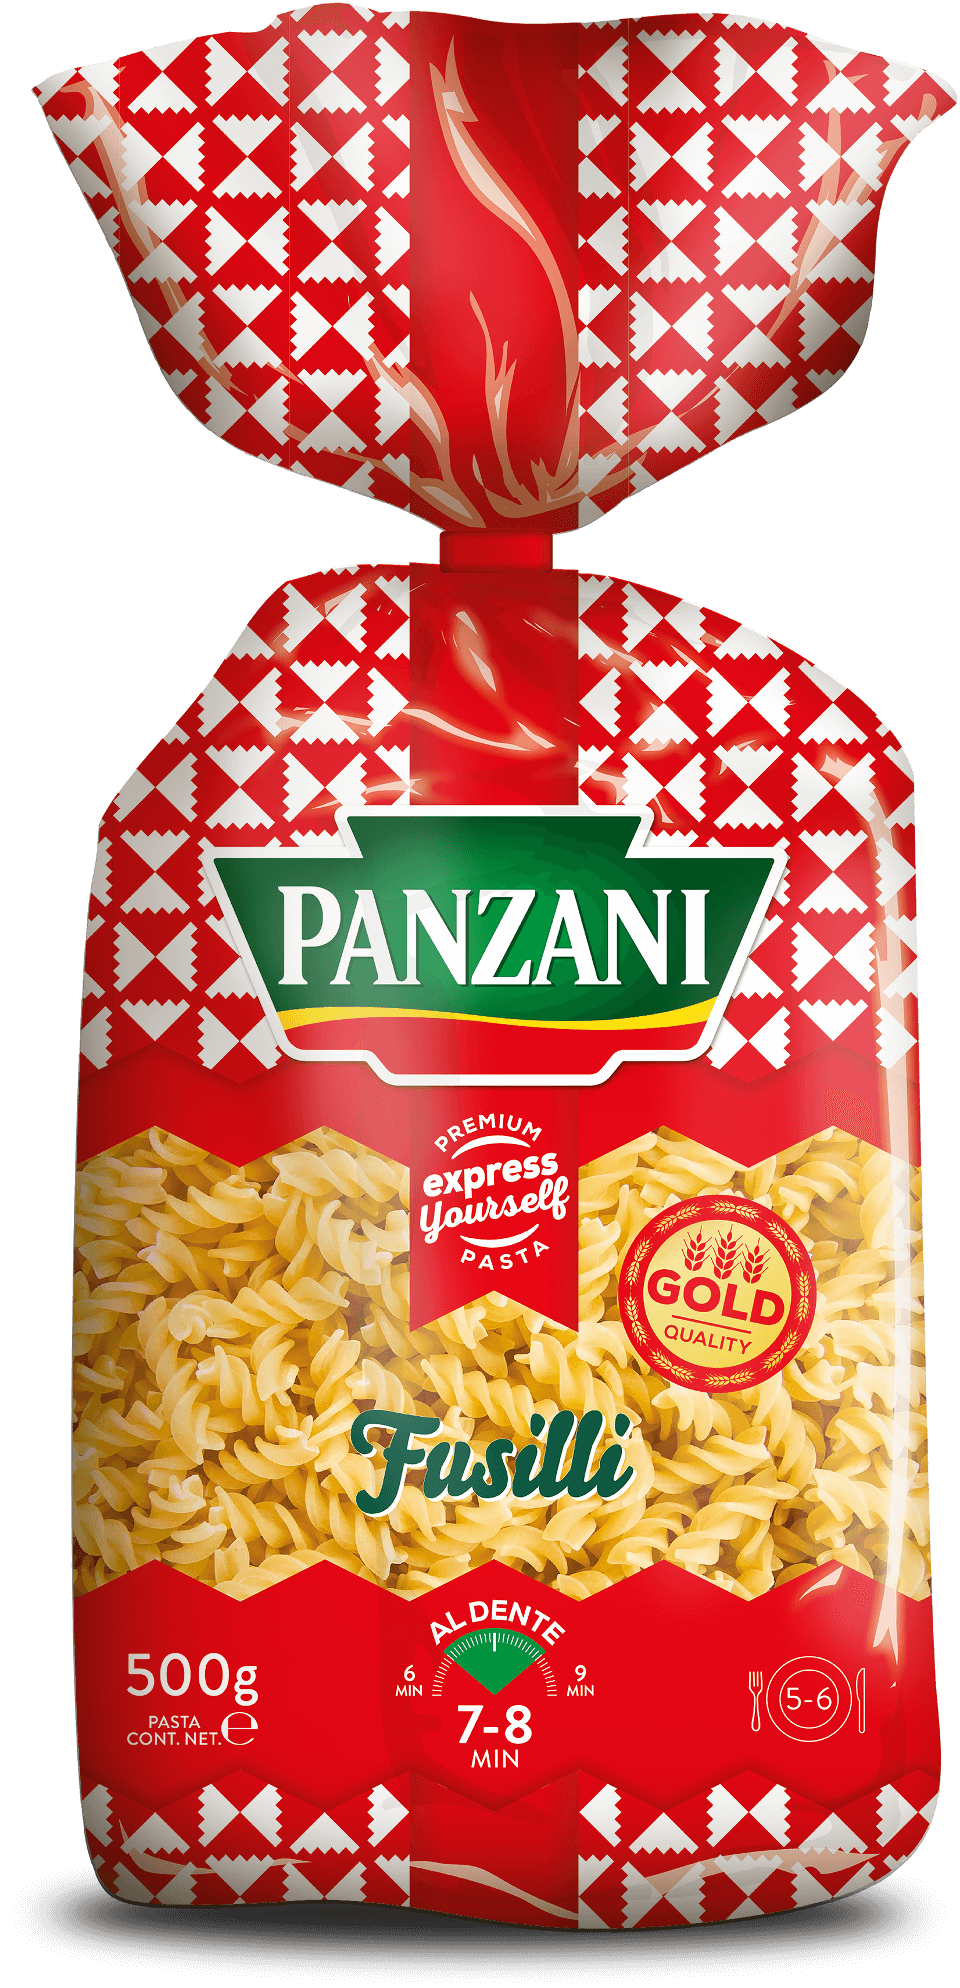 noodle clipart pasta italy